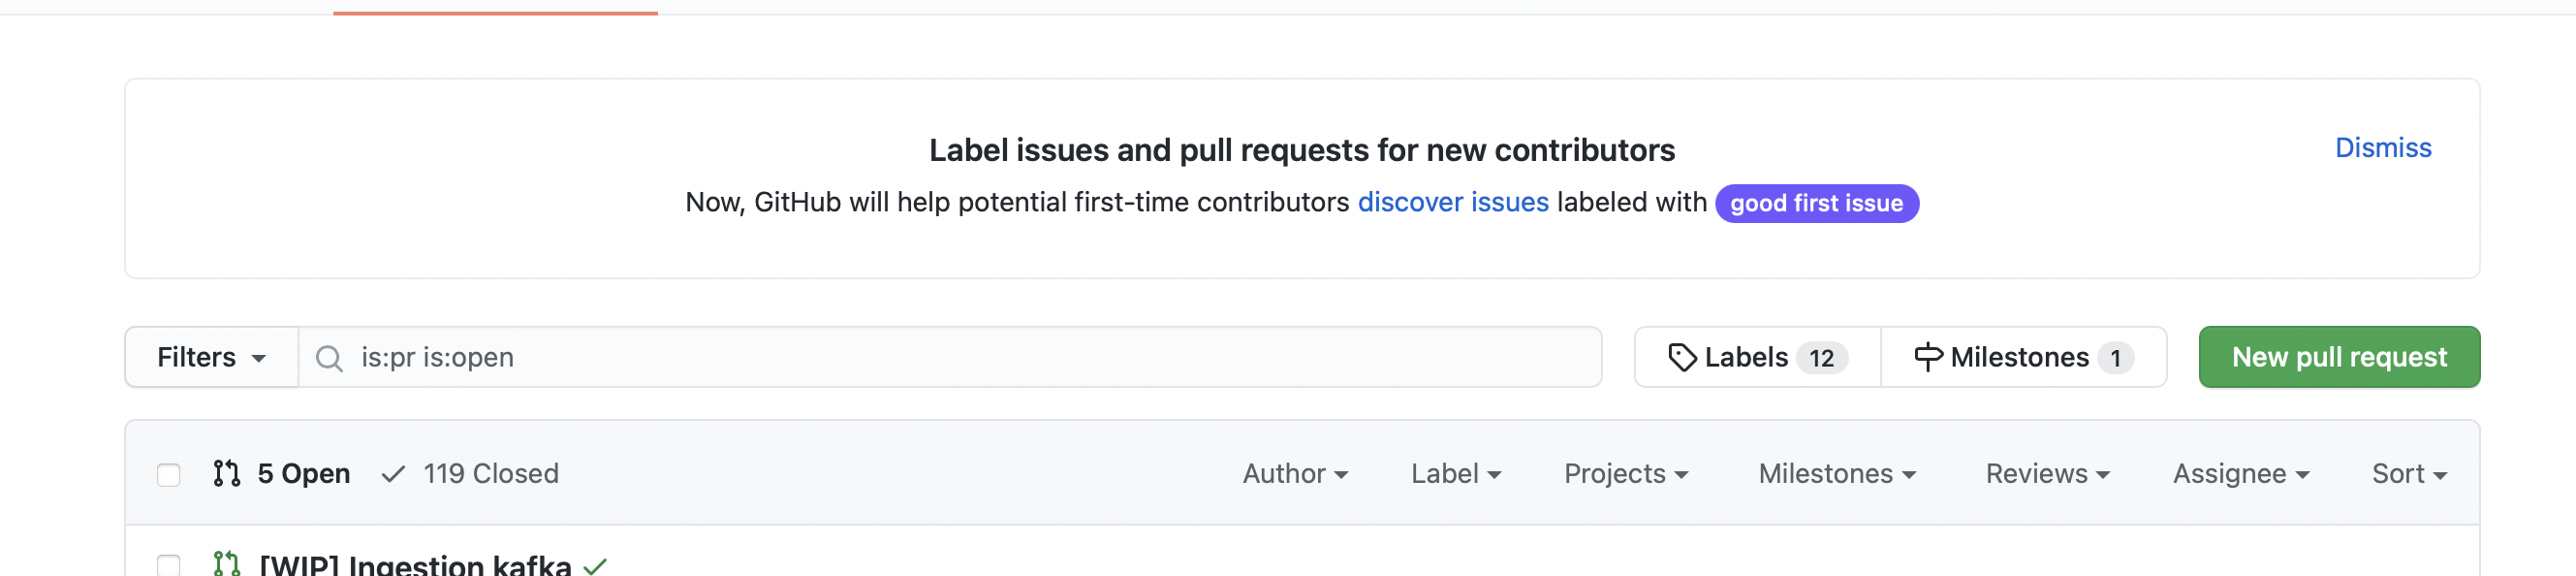 New Pull request